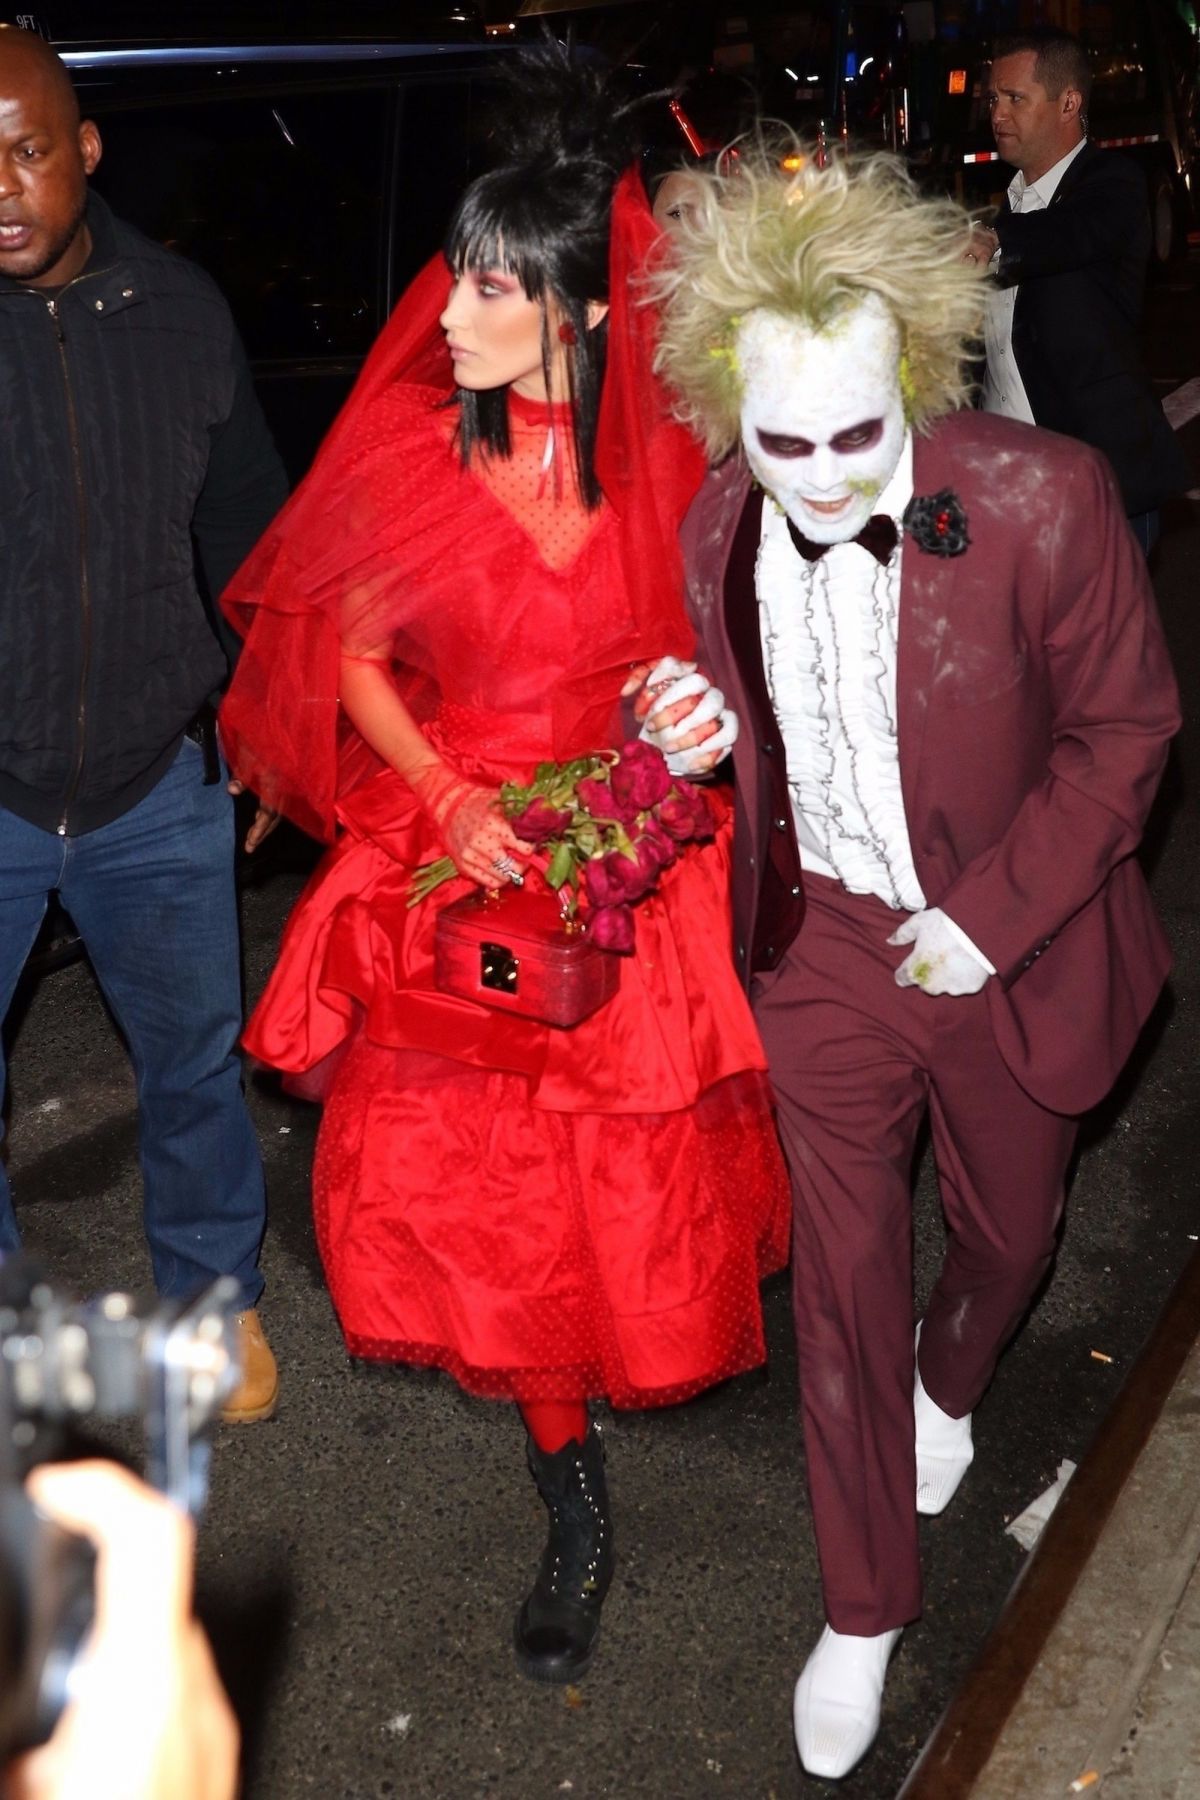 BELLA HADID and The Weeknd at Heidi Klum’s Halloween Party in New York ...